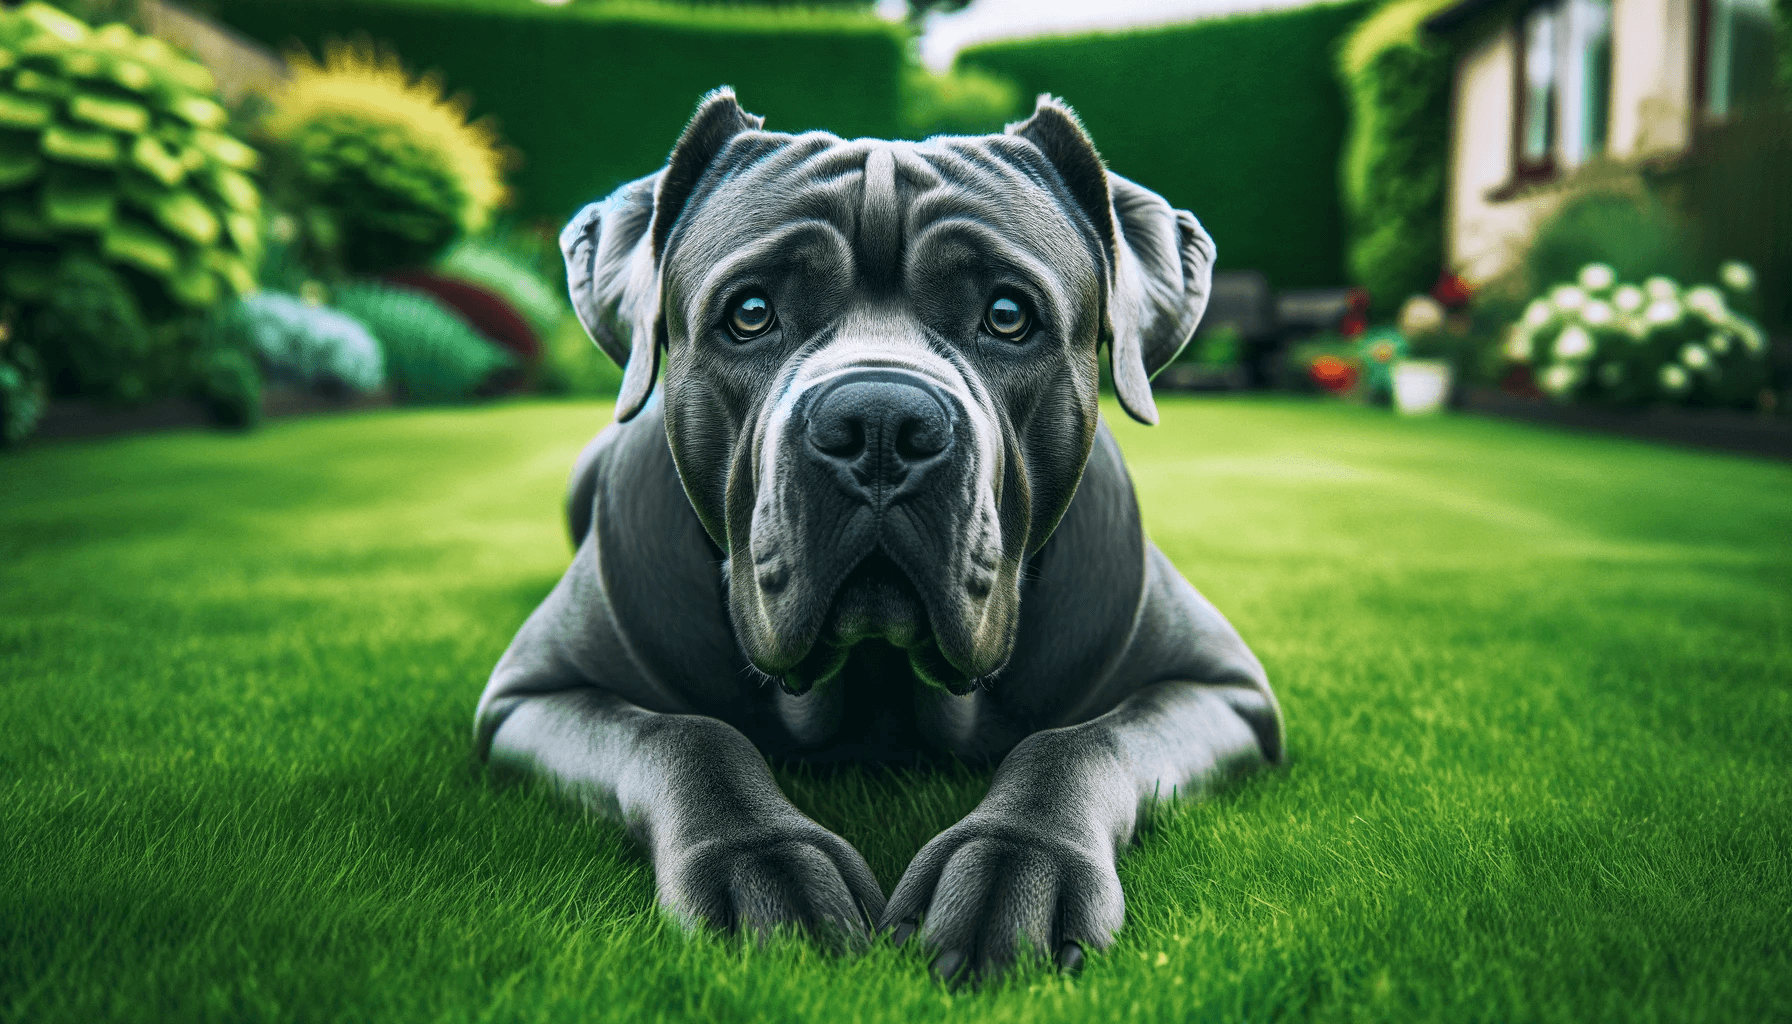 Blue Cane Corsos lying on a lush green lawn, facing the camera with bright attentive eyes.